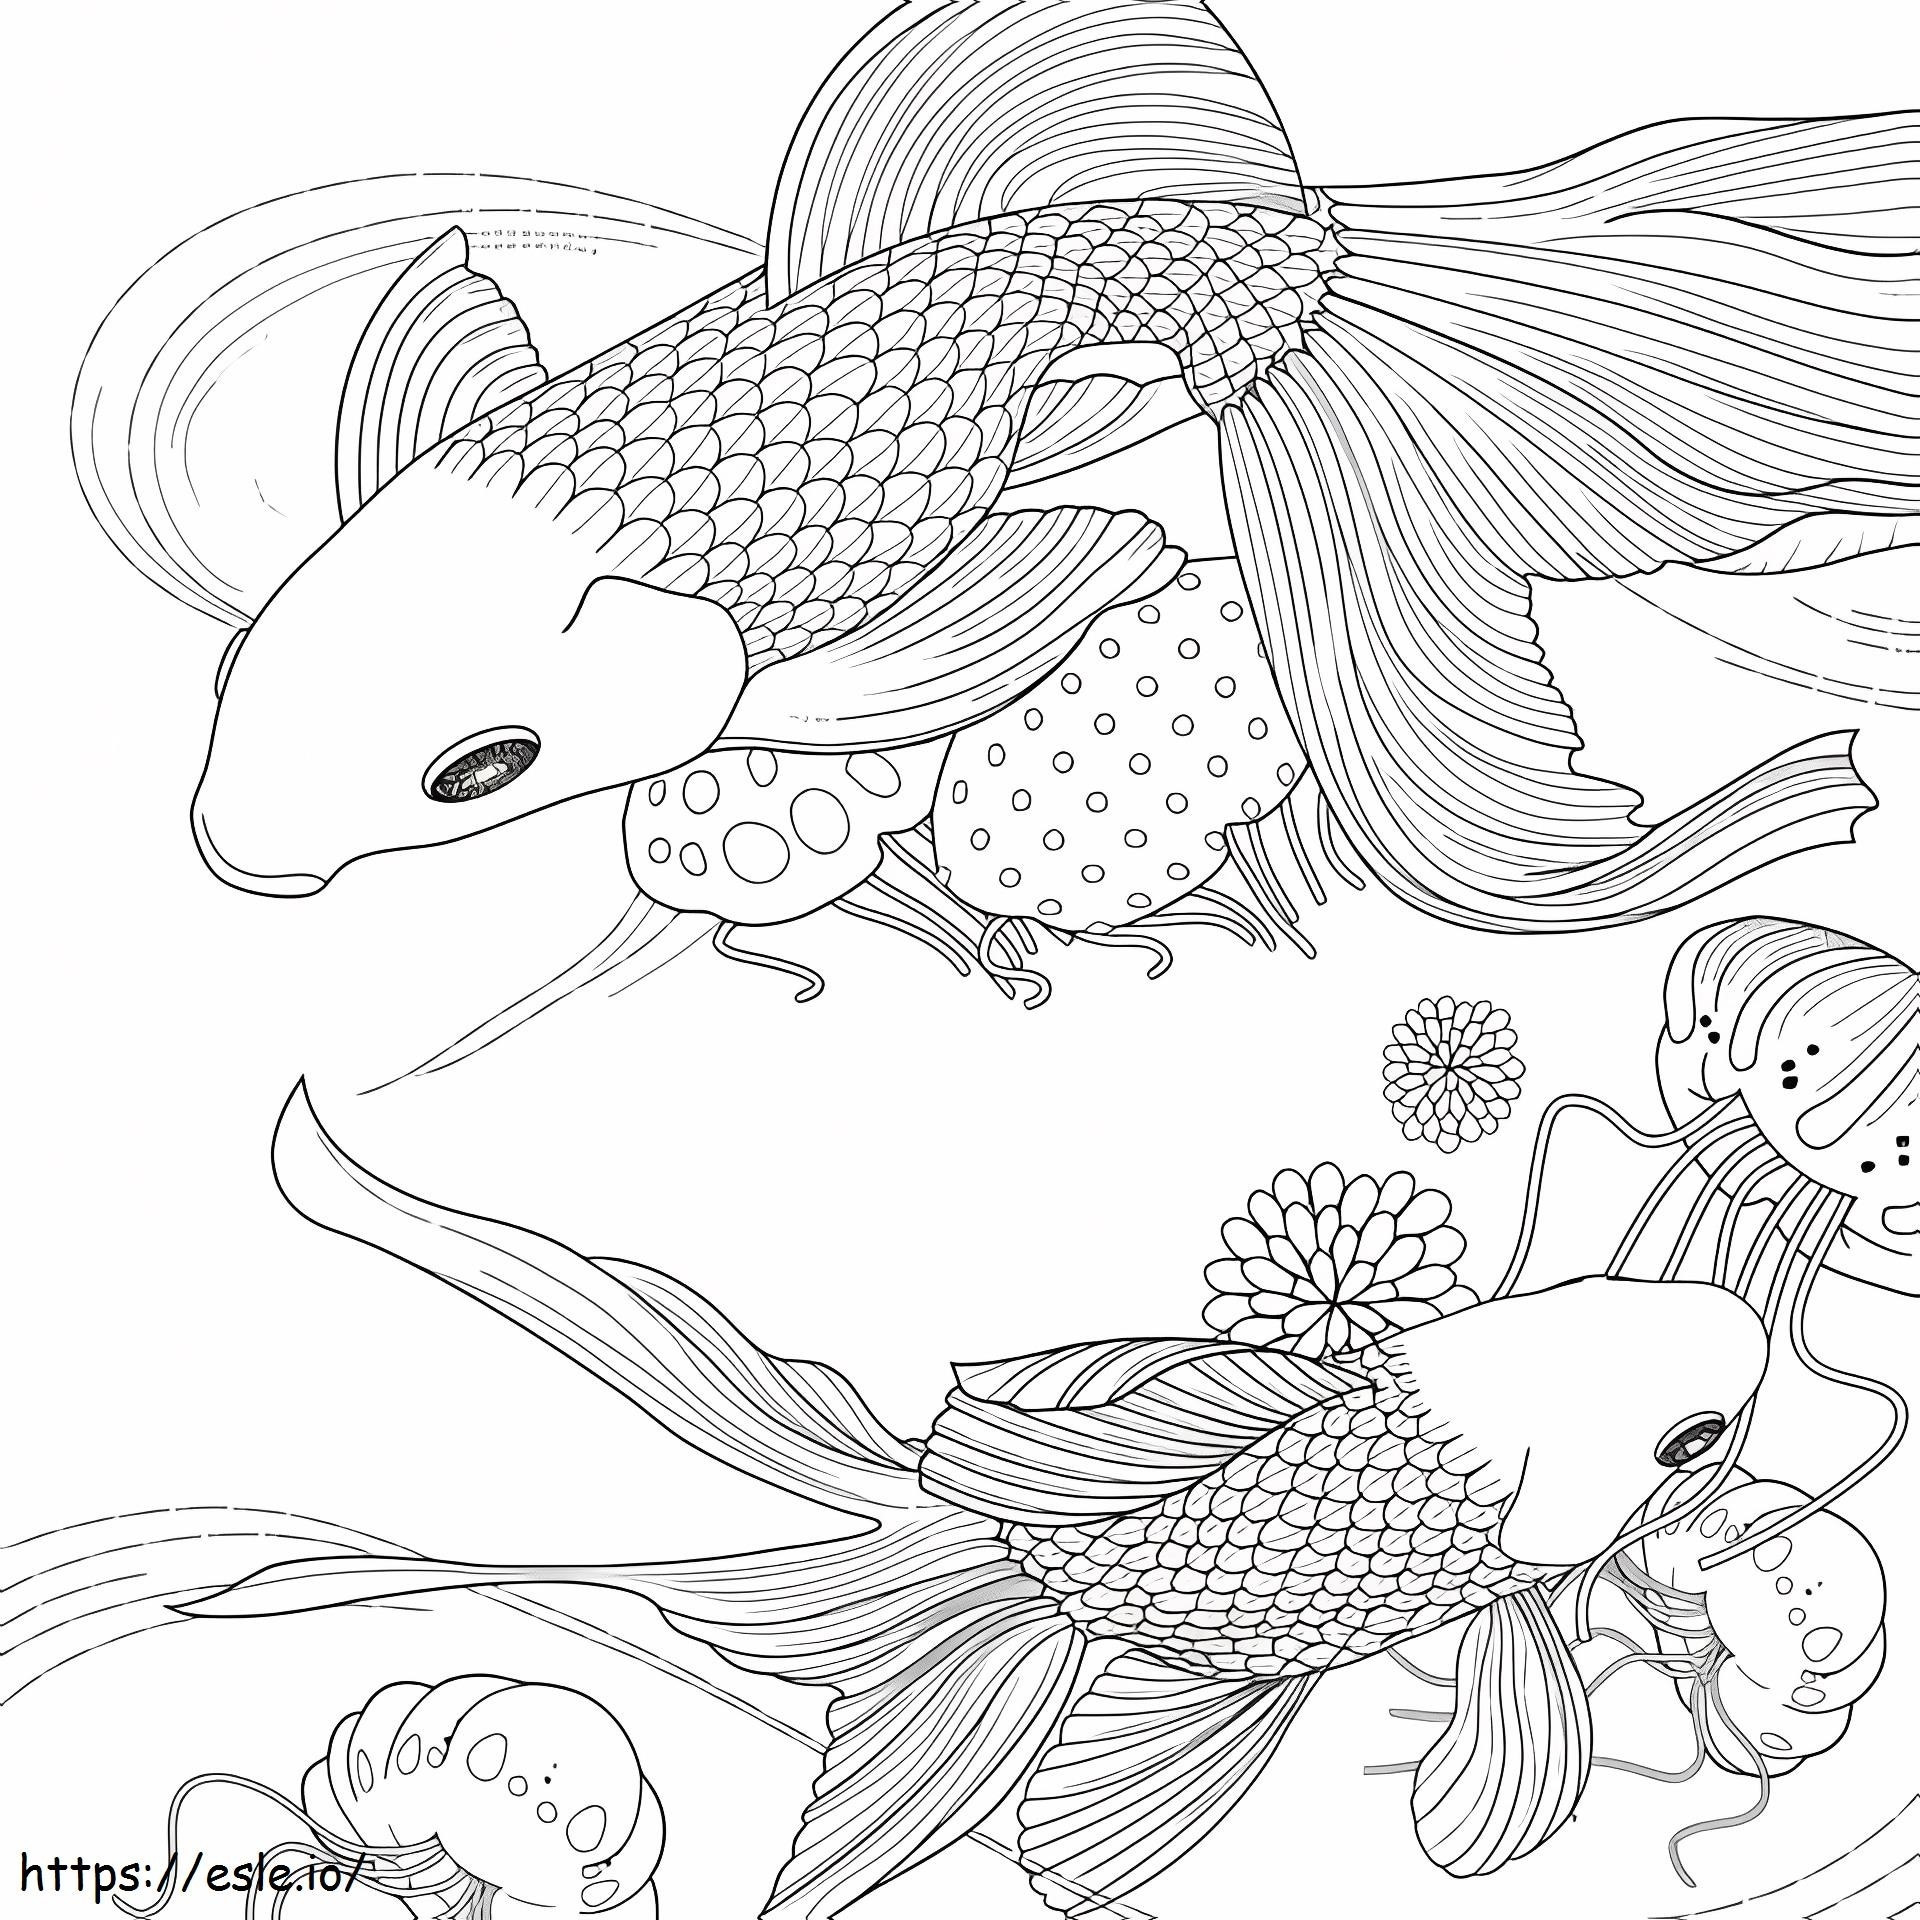 1530150883 Golden Fish1 coloring page